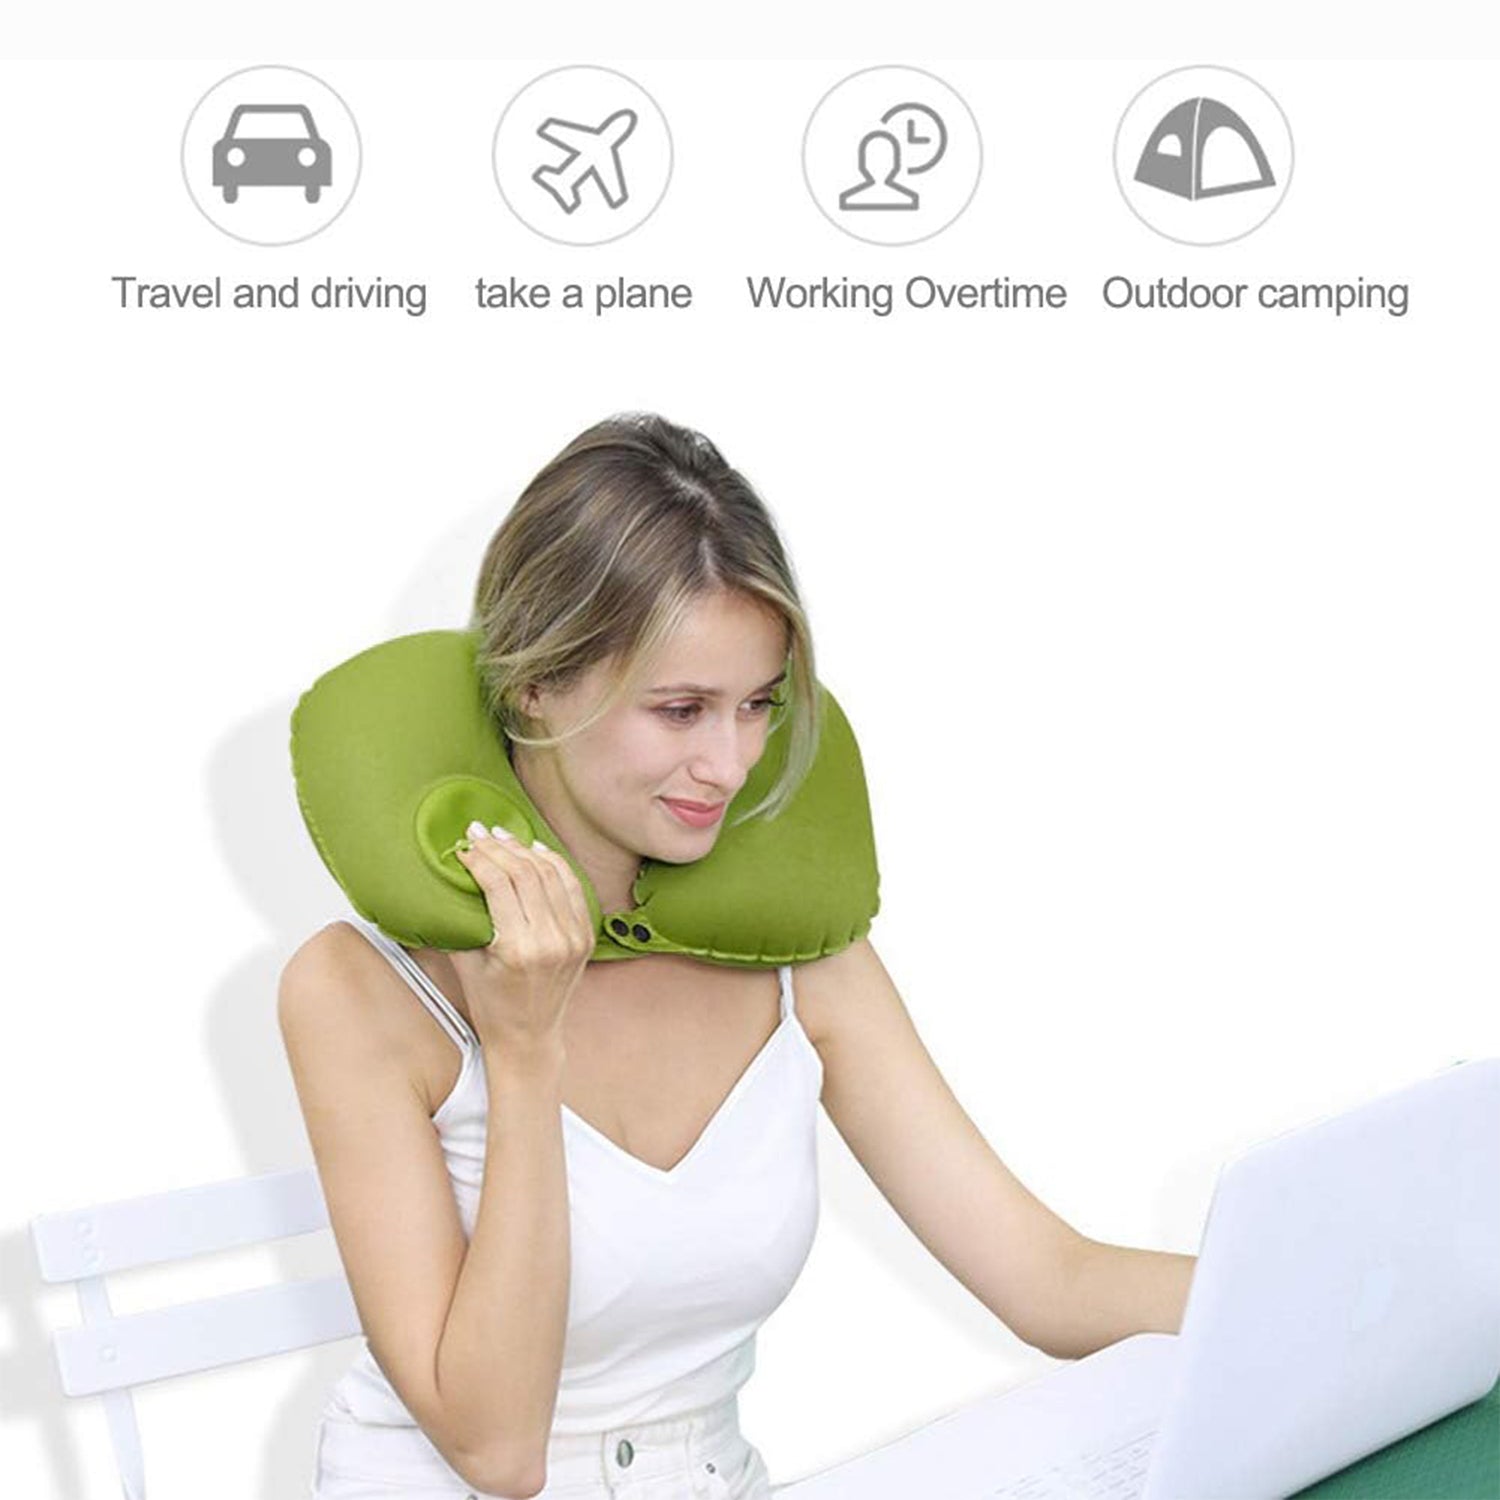 8540 Inflatable & Foldable, Pillow U Shape Air Cushion Travel Pillow, Travel Business Trip Neck Pillow for Long Trips, Ideal for Men & Women Portable, and Perfect for Backpacking, Car Camping, and Even Airplane Travel